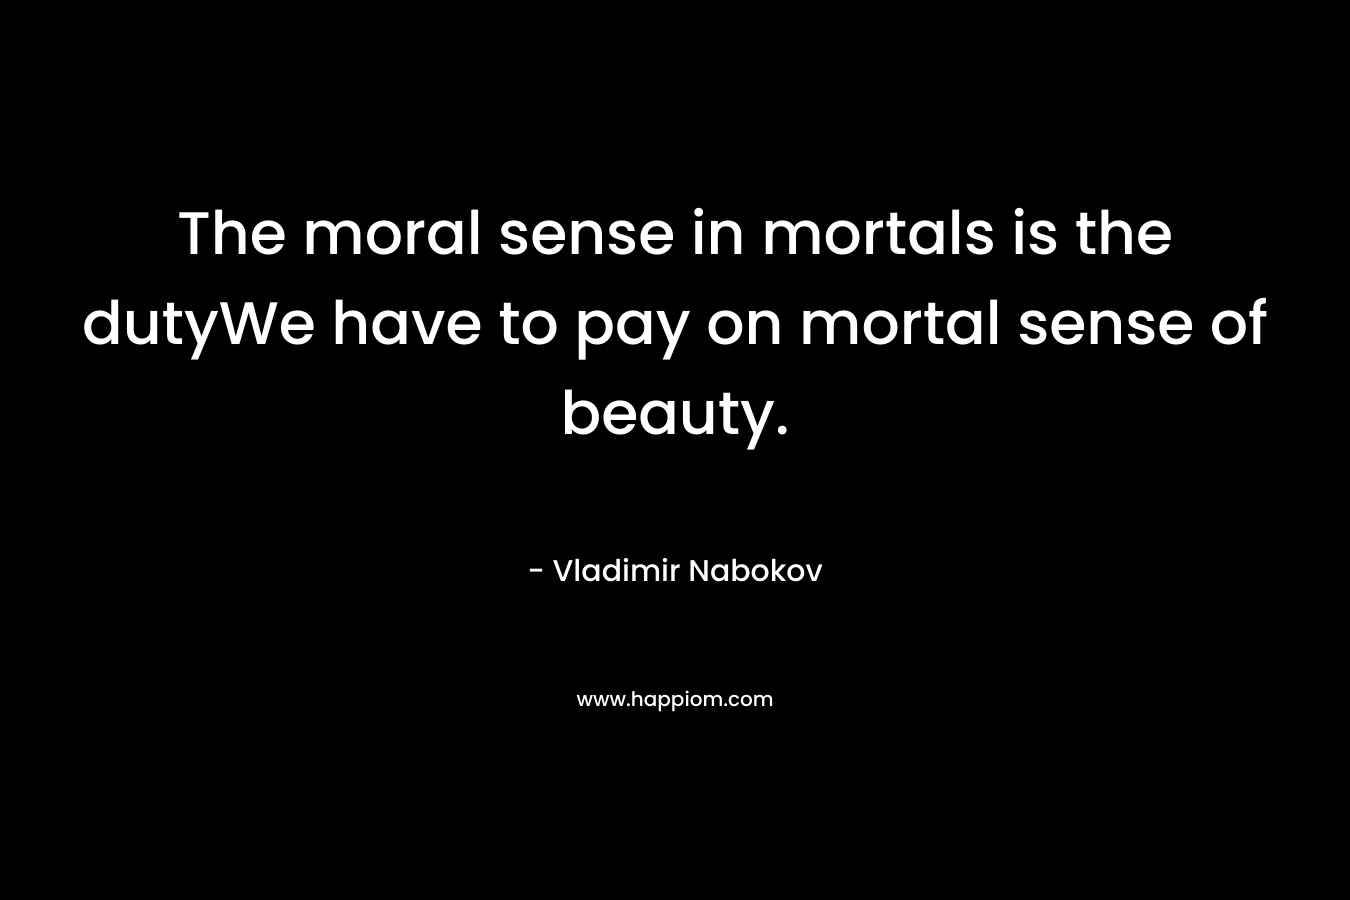 The moral sense in mortals is the dutyWe have to pay on mortal sense of beauty.